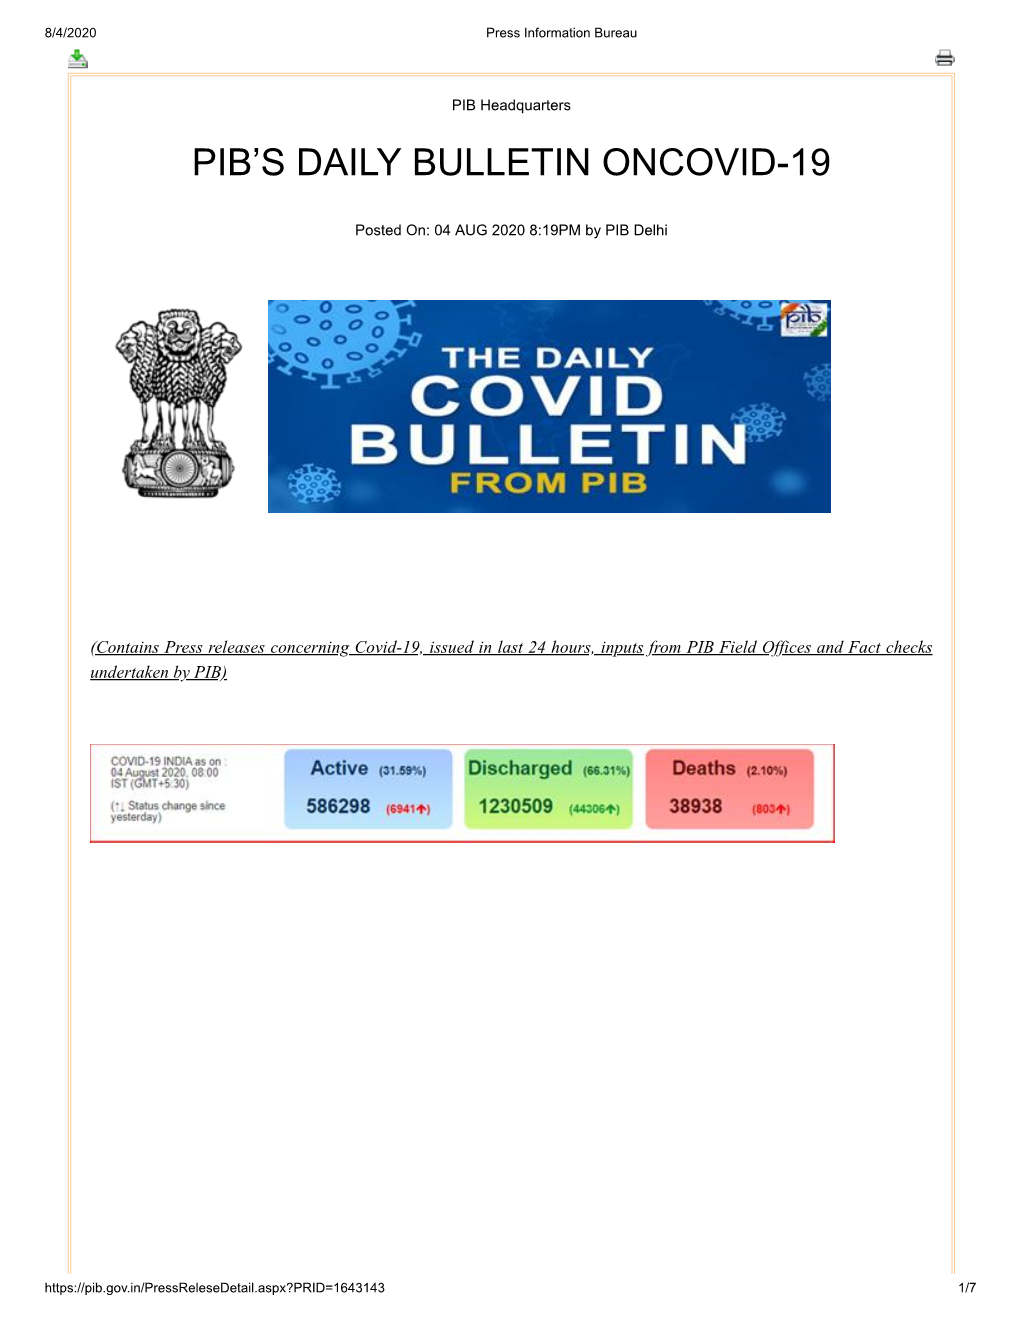 Pib's Daily Bulletin Oncovid-19